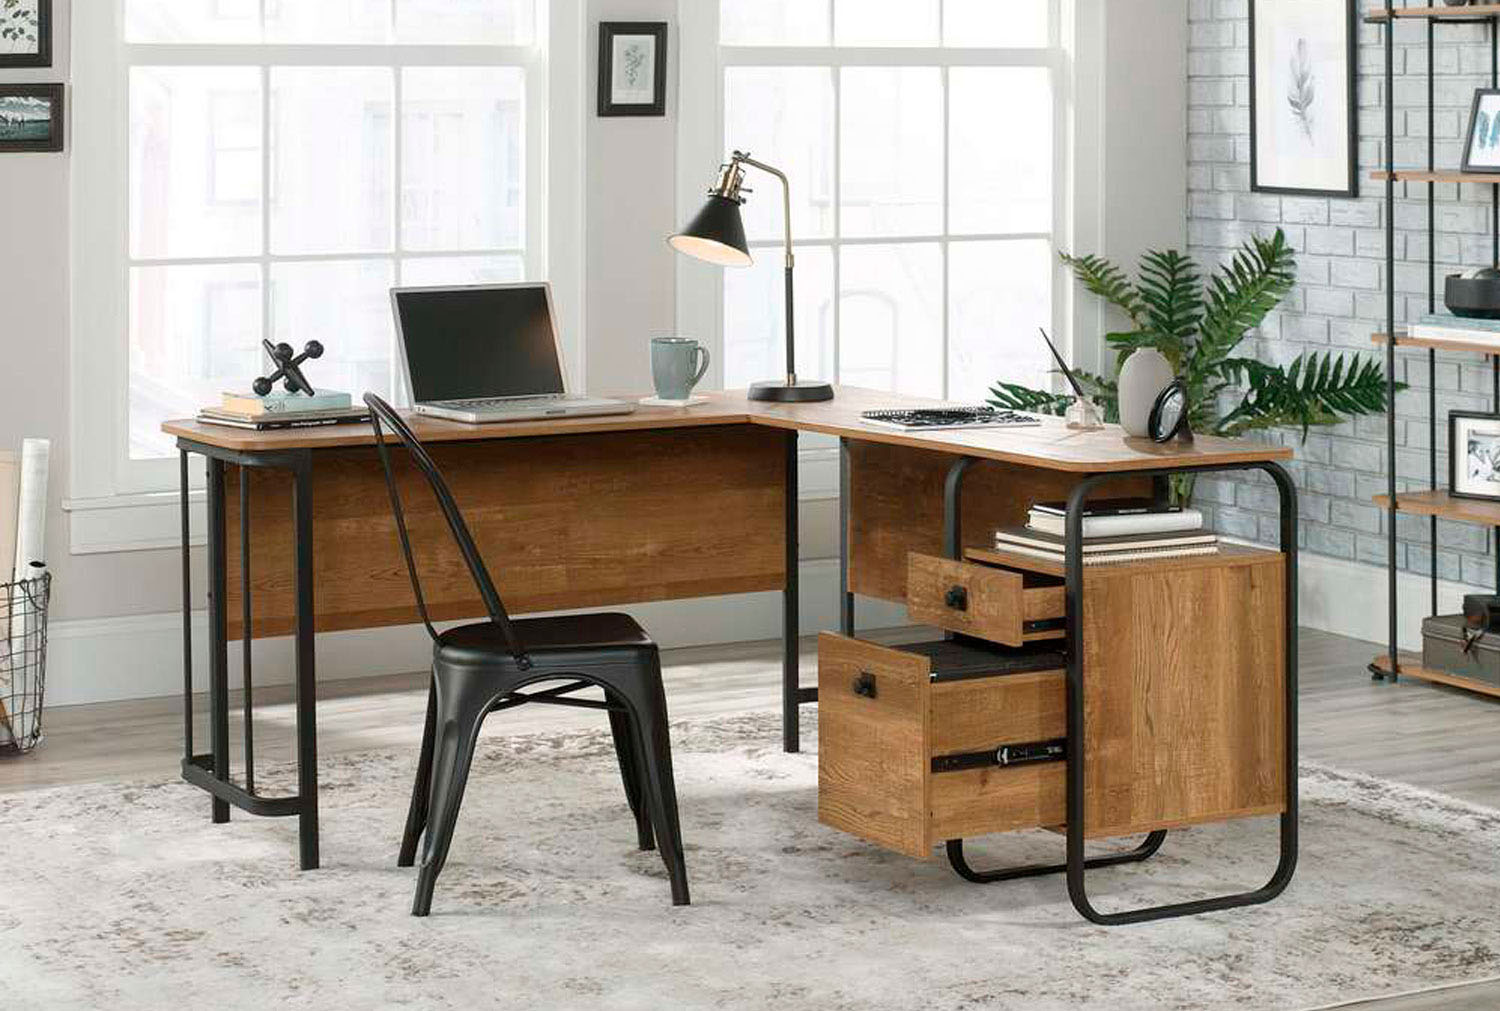 10 Tips For Designing Your Home Office In 2021